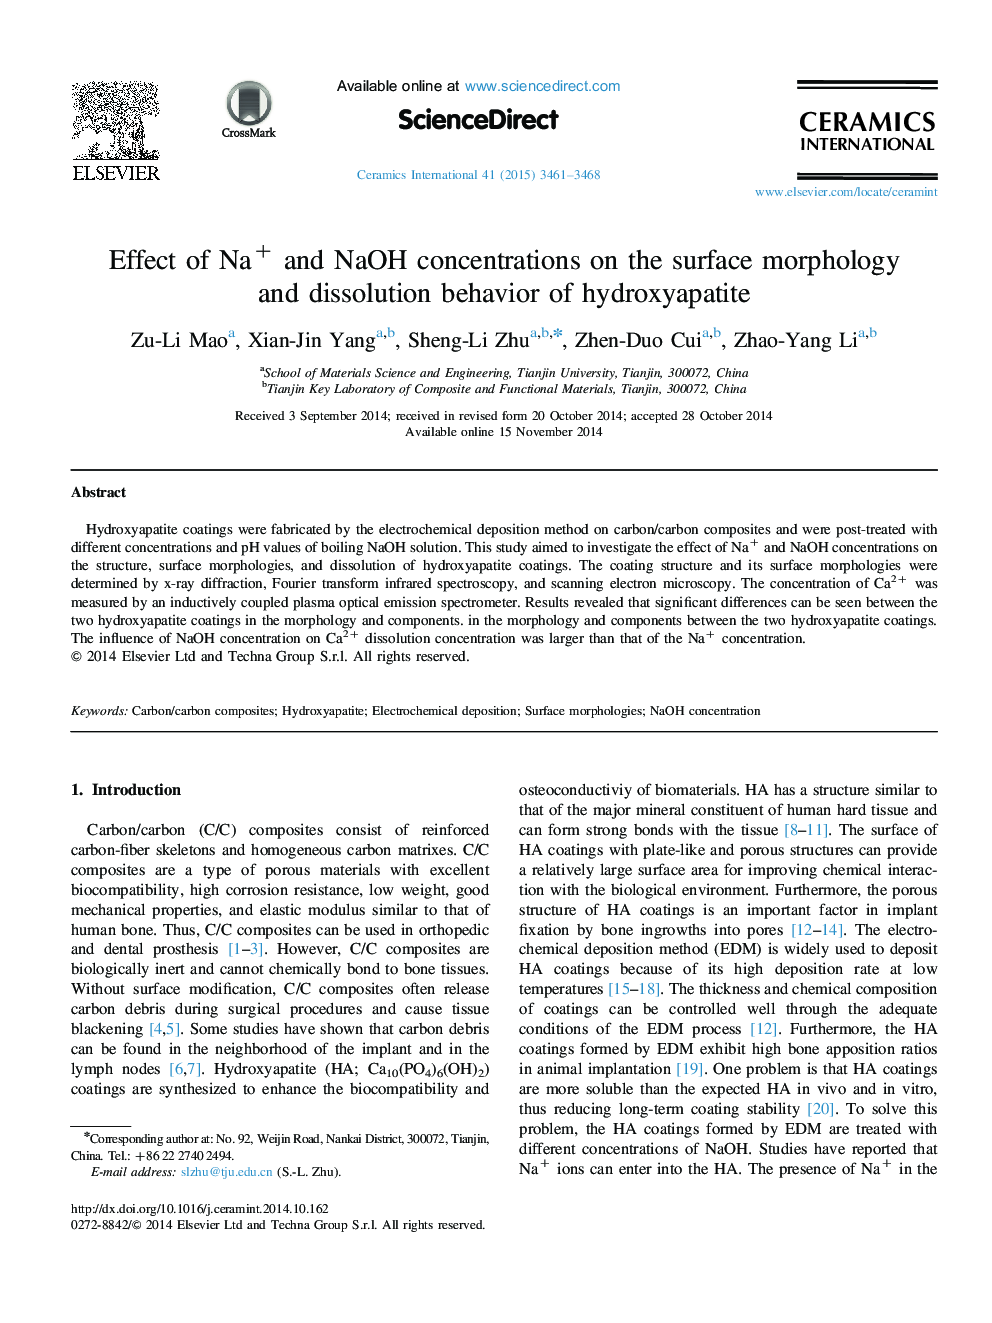 Effect of Na+ and NaOH concentrations on the surface morphology and dissolution behavior of hydroxyapatite